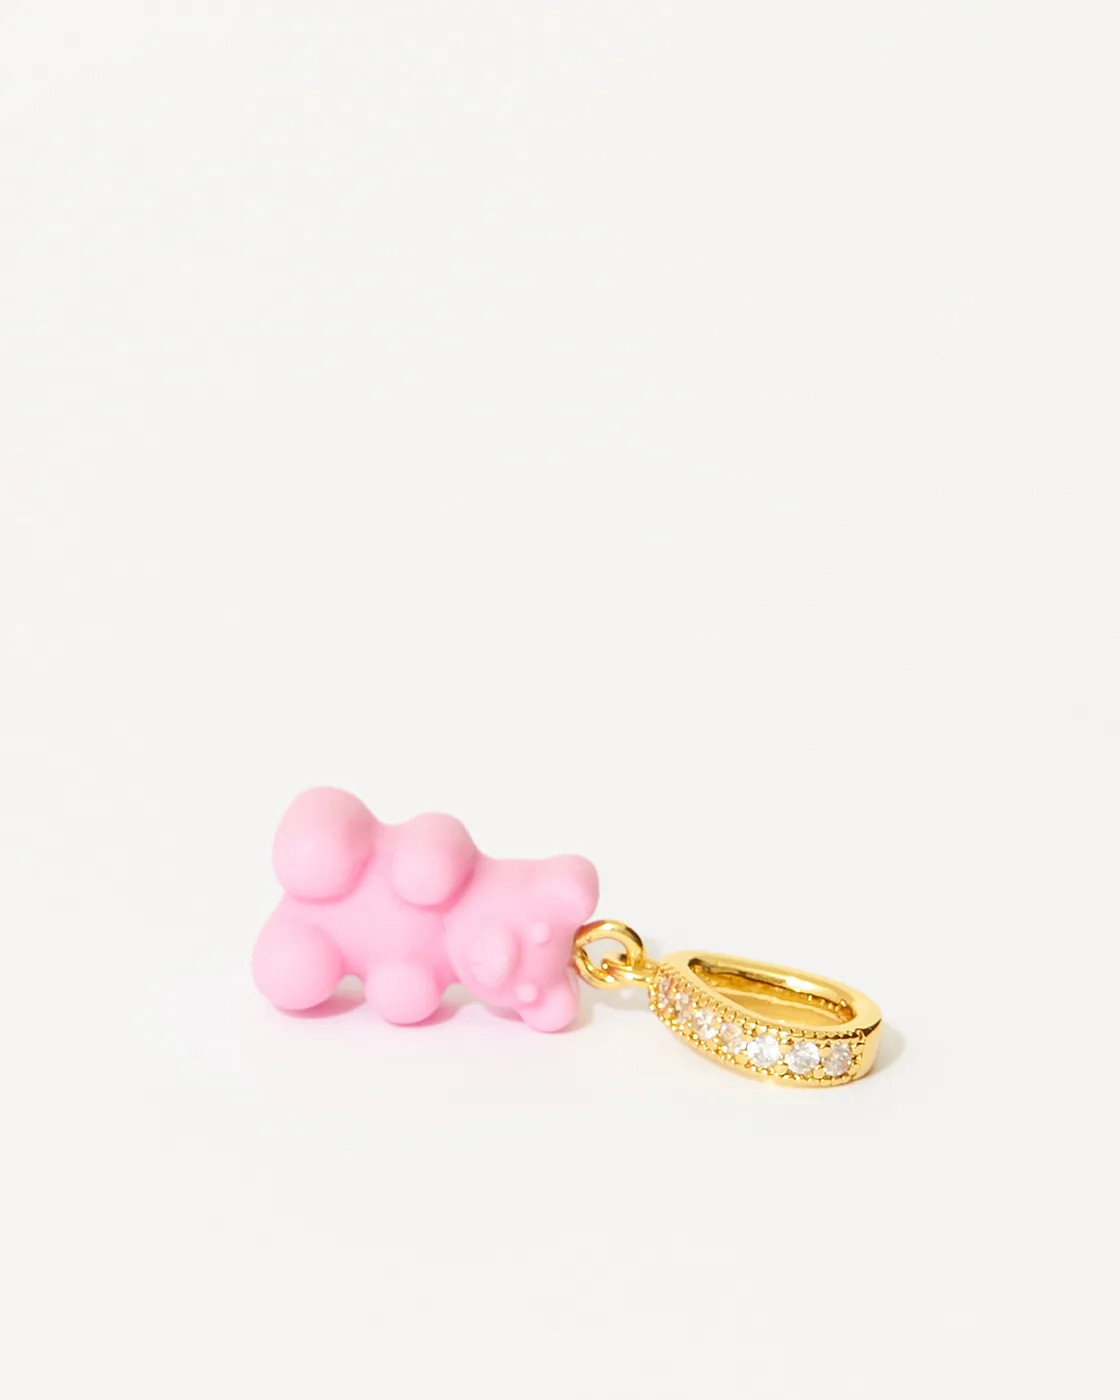 Nostalgia Bear Gold-Plated Resin Pendant with Pave Connector - Candy pink